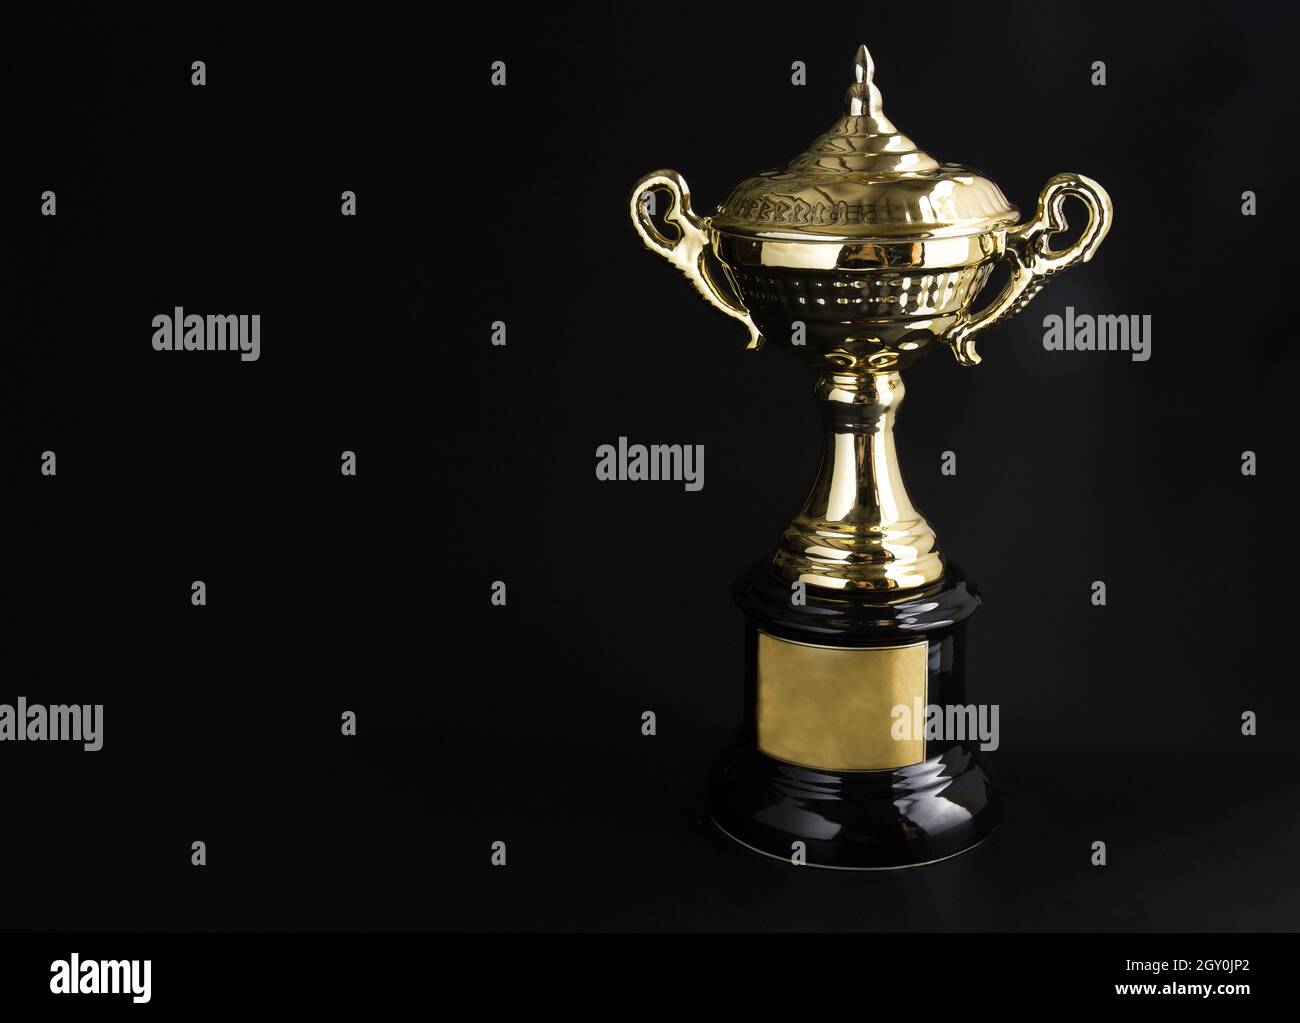 Premium PSD  3d rendering of gold trophy basketball sports championship  match perspective view